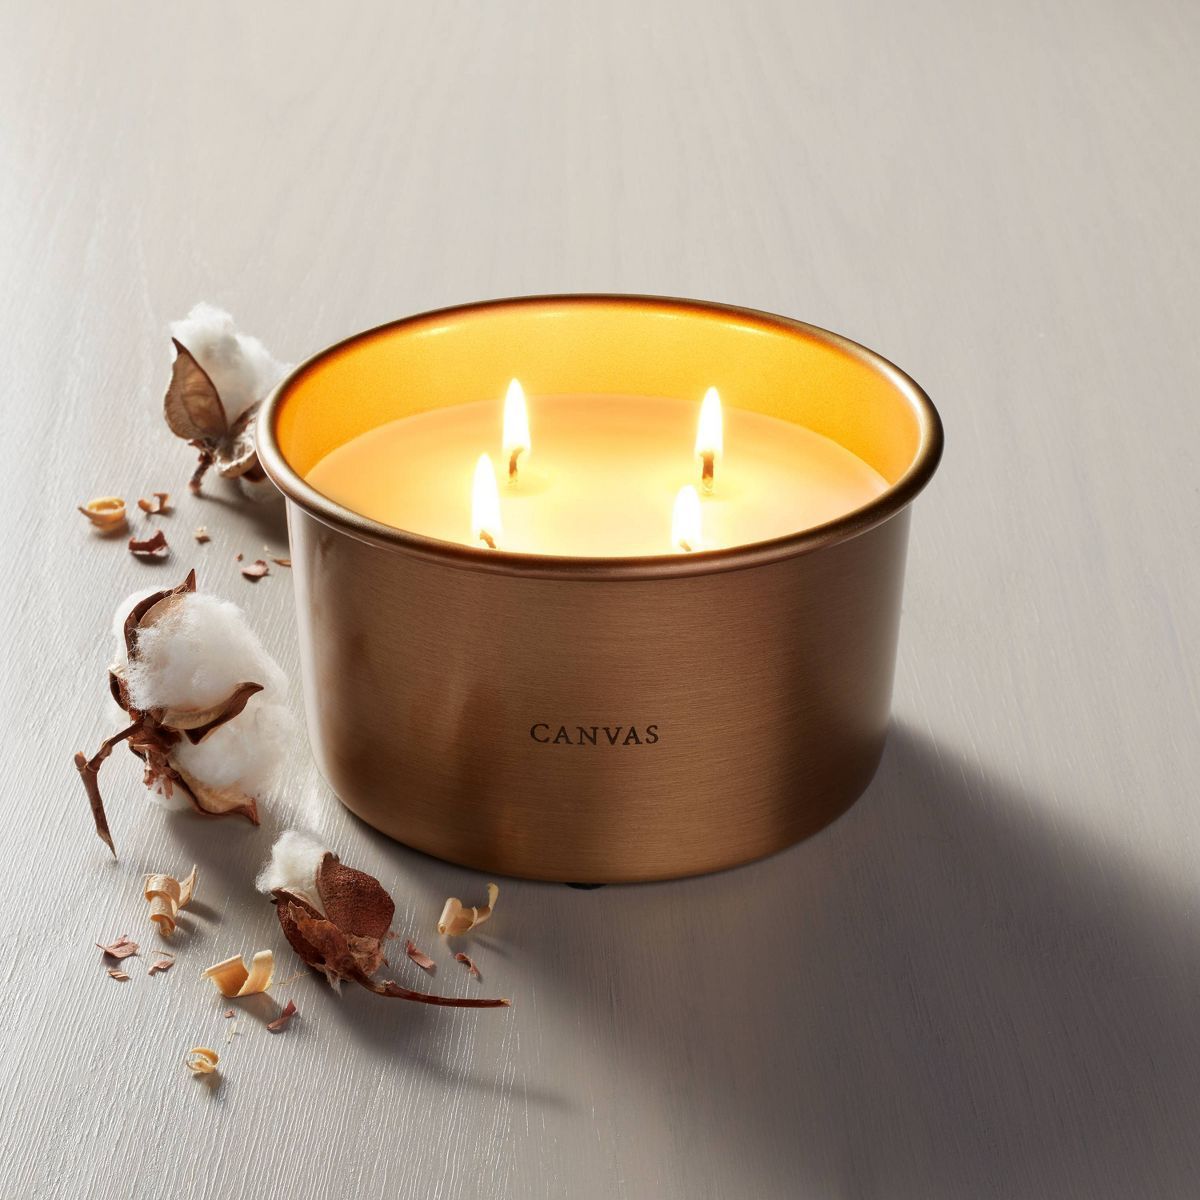 Lidded Metal Canvas 4-Wick Jar Candle Brass Finish 20oz - Hearth & Hand™ with Magnolia | Target